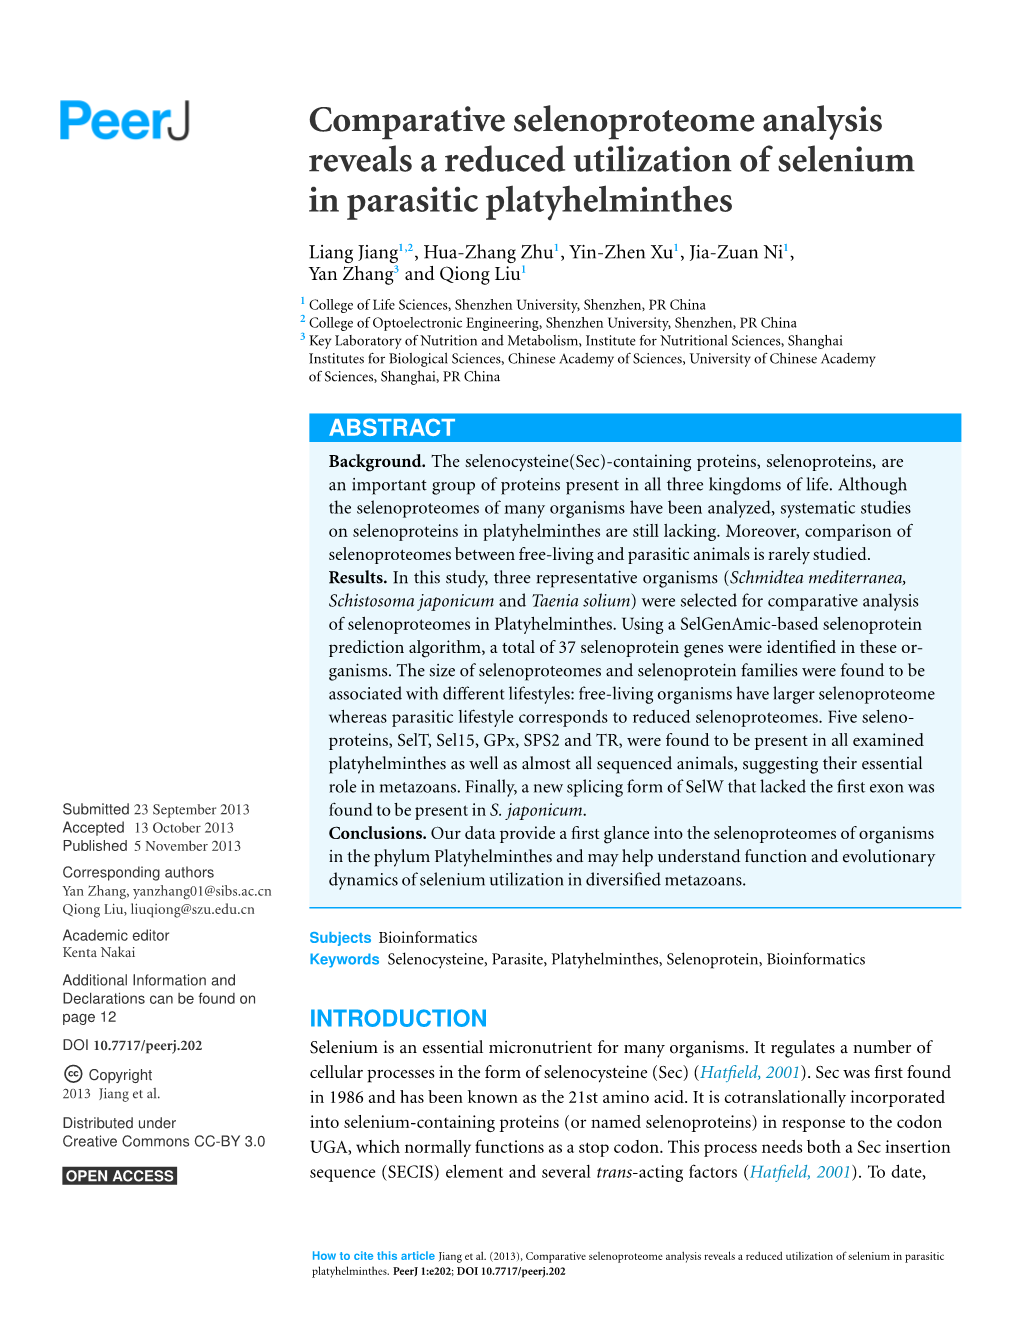 Comparative Selenoproteome Analysis Reveals a Reduced Utilization of Selenium in Parasitic Platyhelminthes